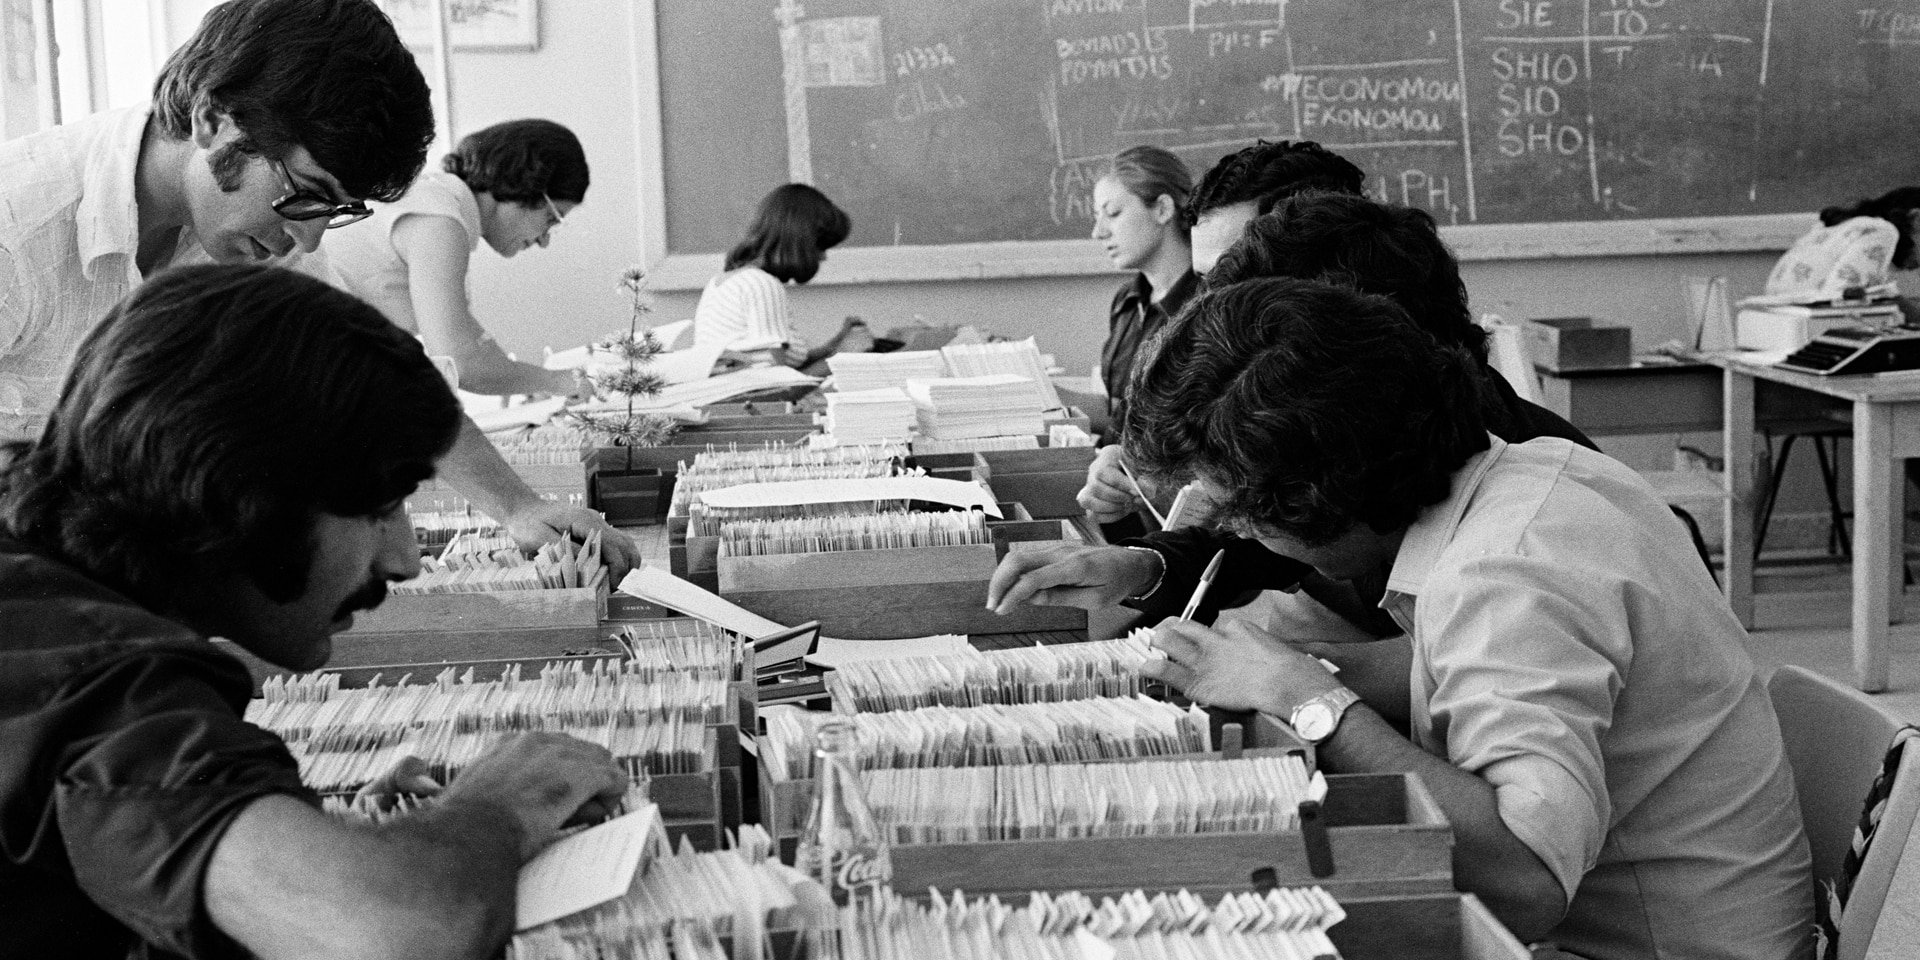 The picture, black and white, shows an office space in 1974. The desks are covered with index boxes filled with index cards. Eight people, concentrated, are working hard.  